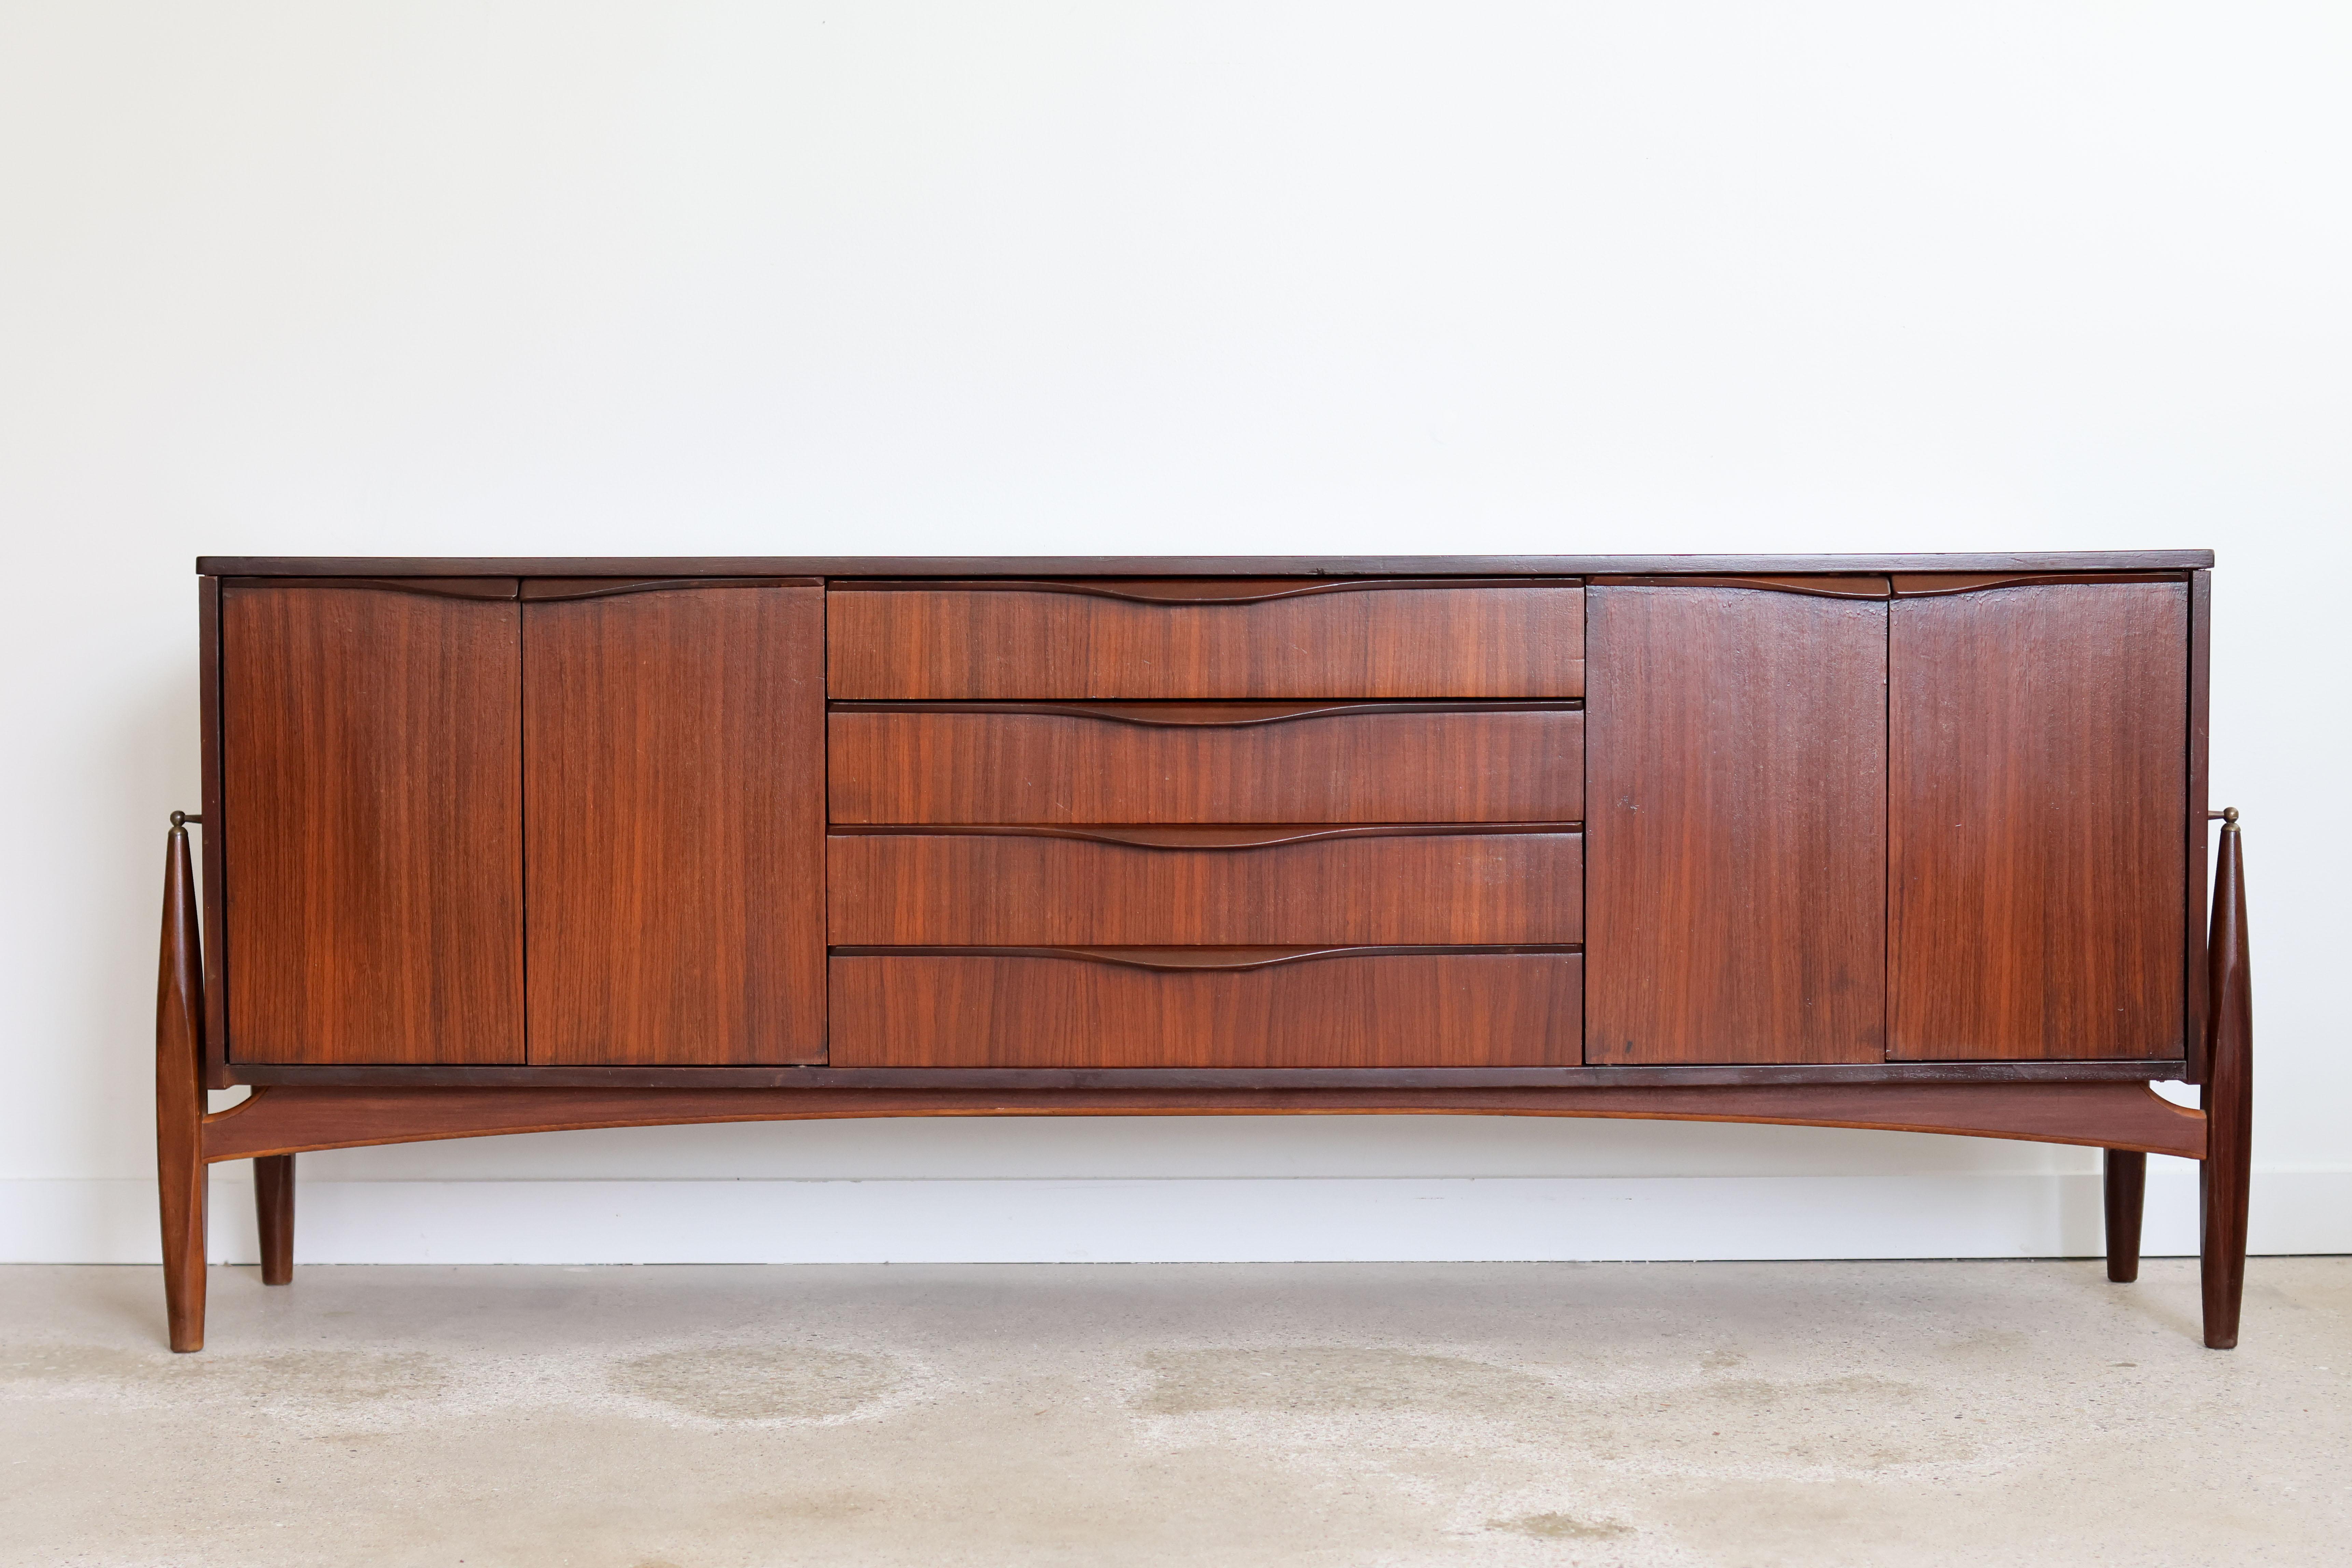 Mid-Century Modern mahogany credenza by Elliotts of Newbury, UK.
Floating legs with little brass accents.
Symmetrical sideboard with two sets of double cabinets and adjustable shelves.
Four dovetailed drawers.
Excellent vintage condition.

77 1/2”